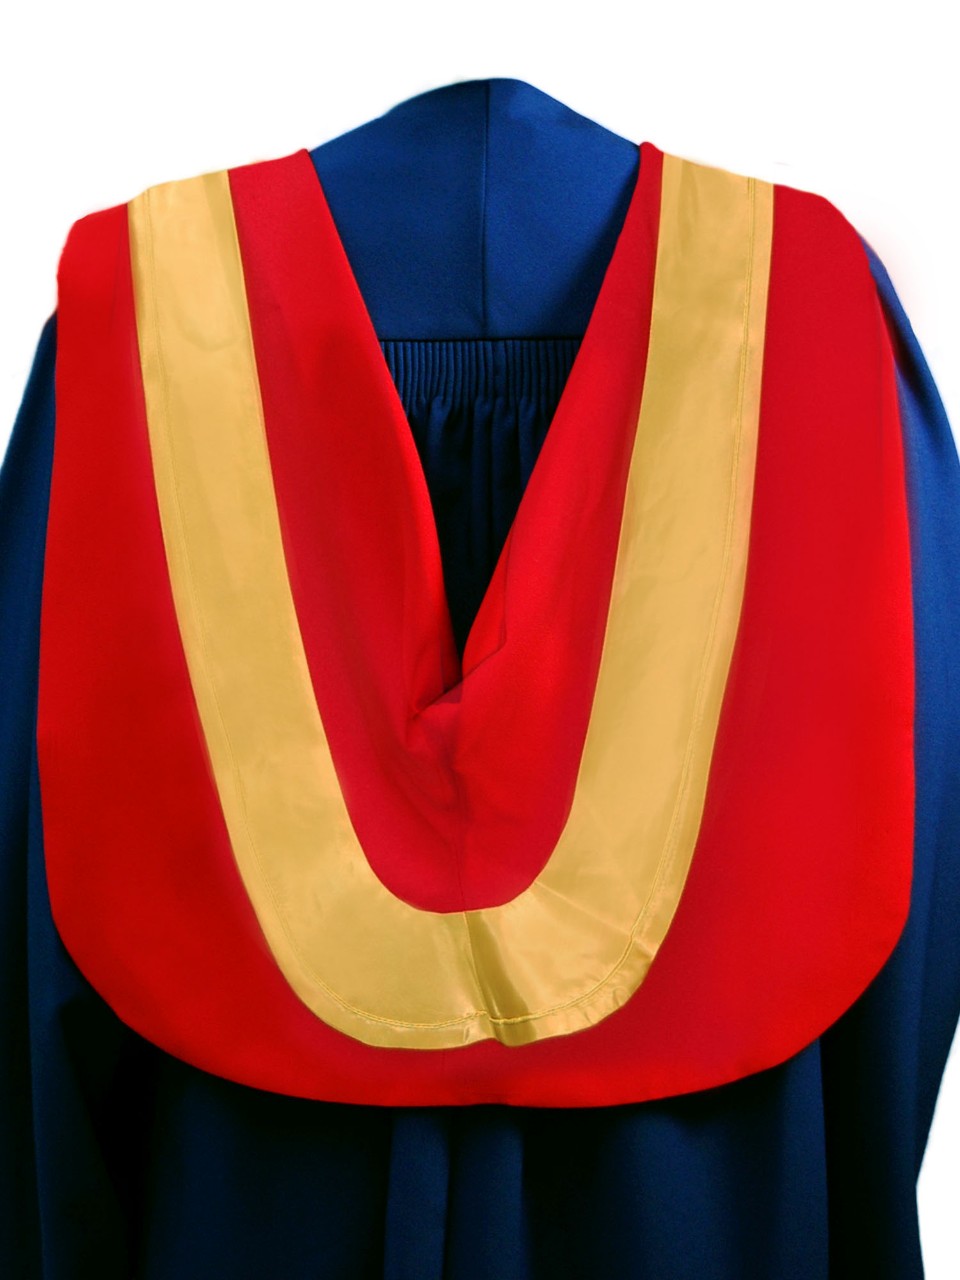 The Master of Science hood is red with wide gold border and gold cording